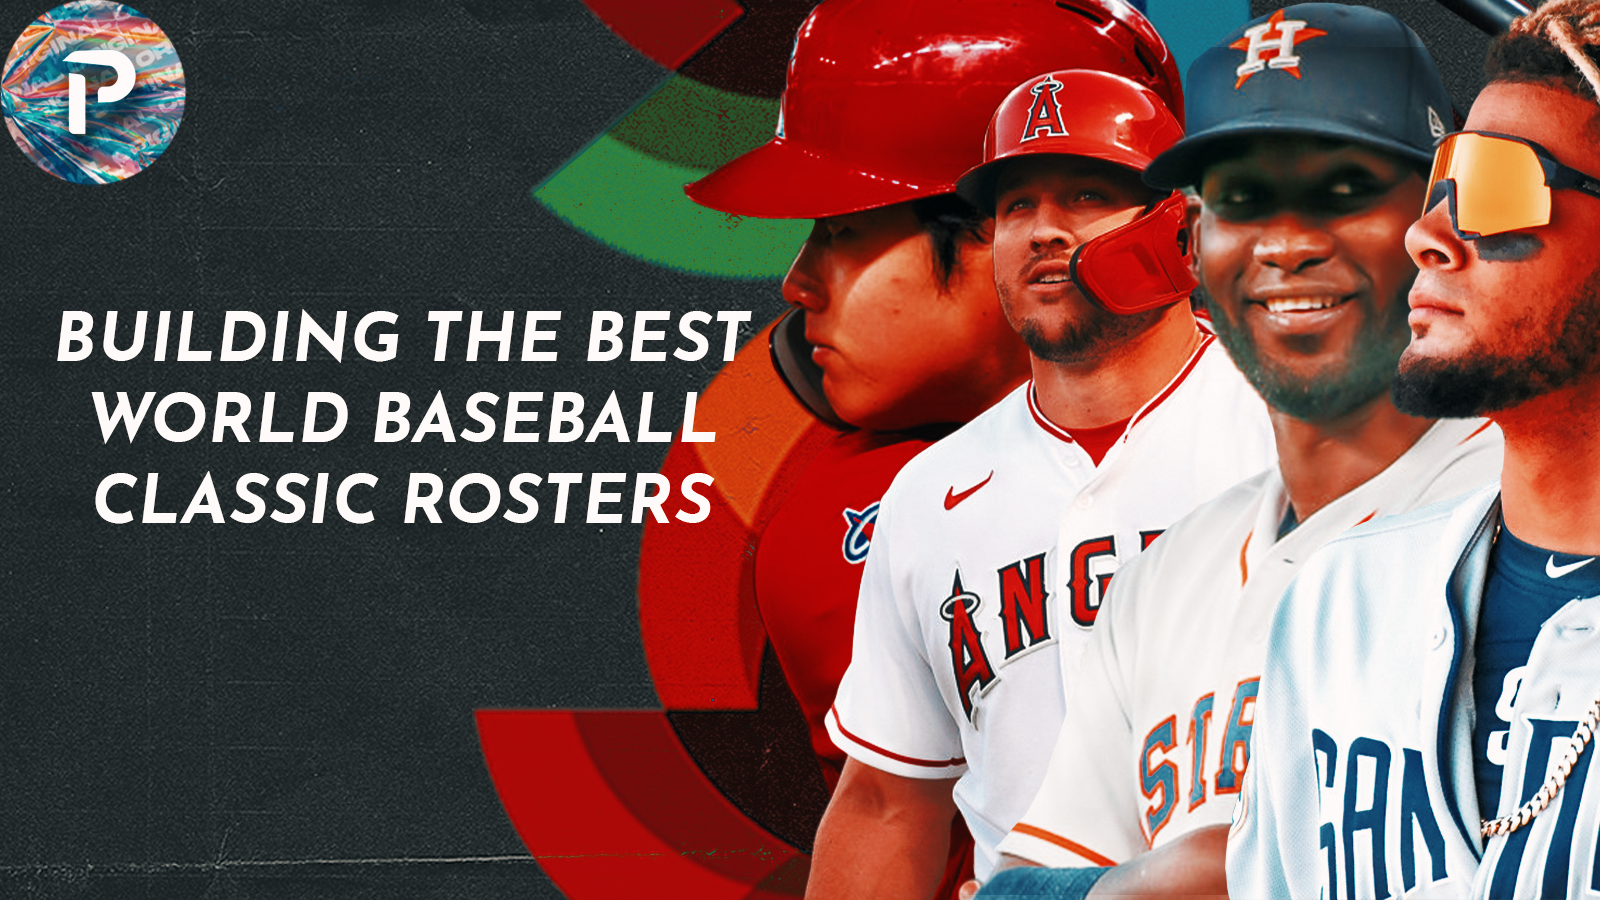 The Best World Baseball Classic Rosters for 2023